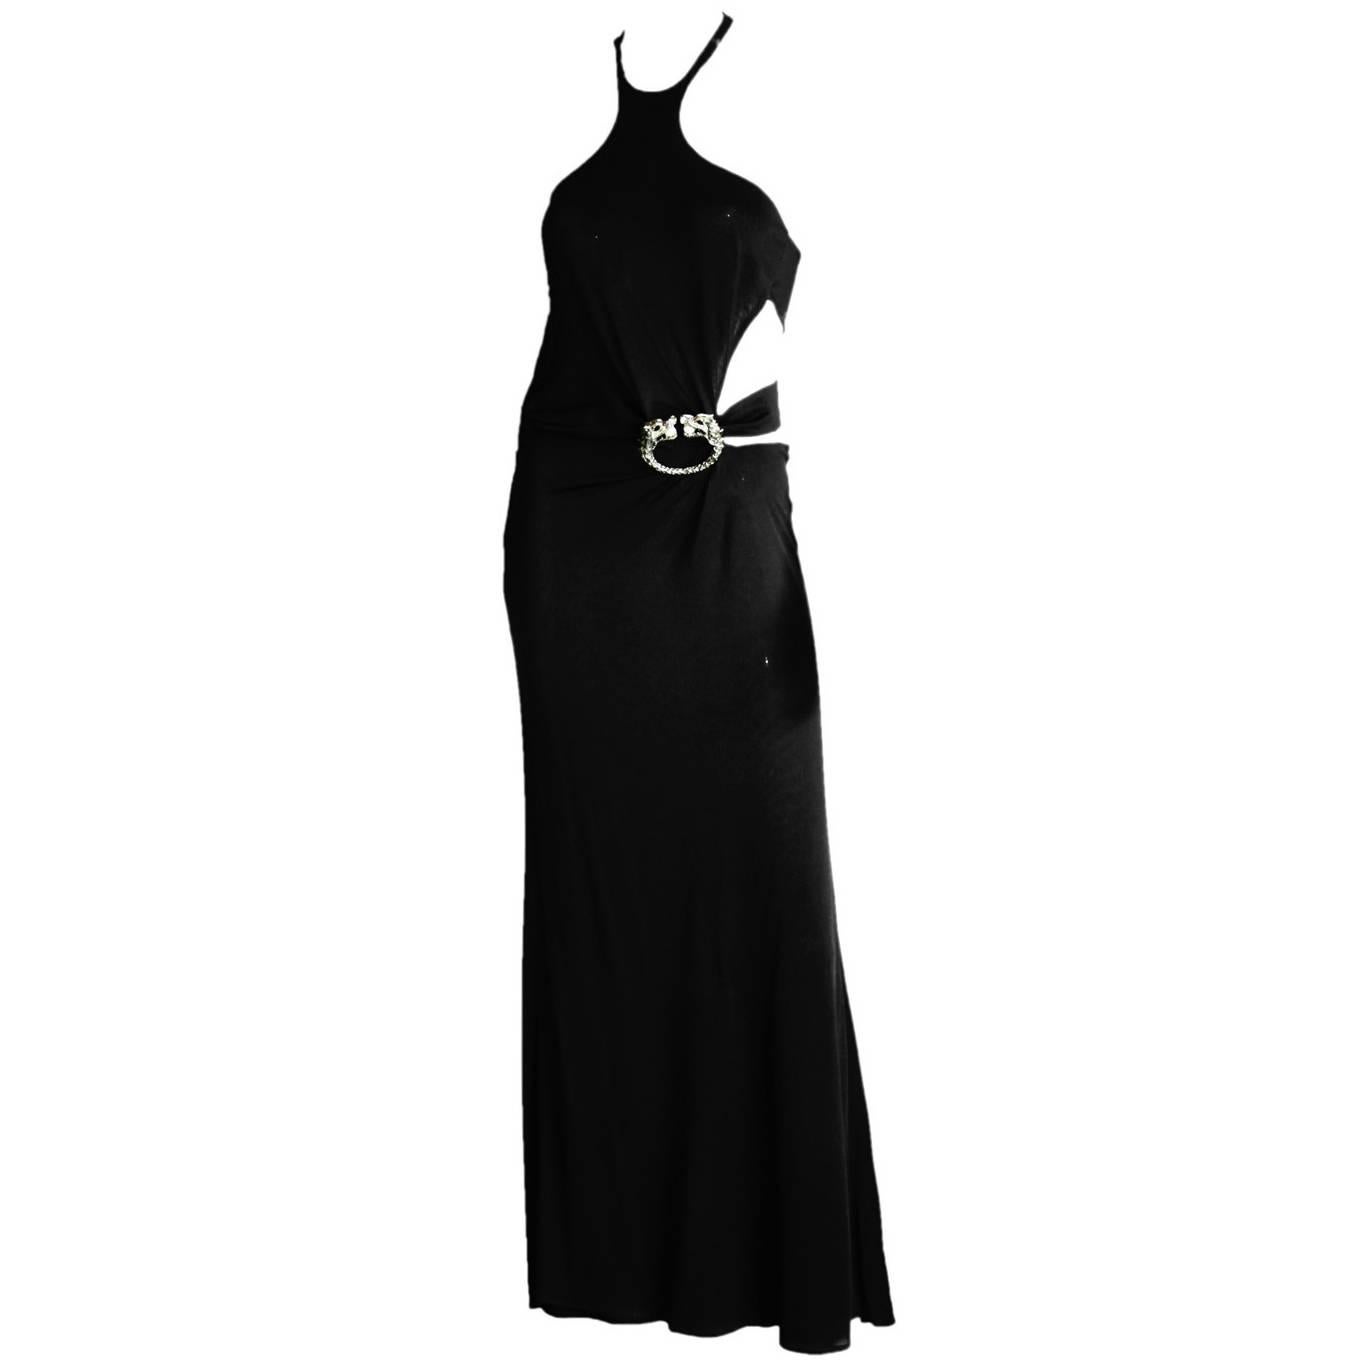 Free Shipping:Rare & Iconic Tom Ford Gucci FW 2004 Collection Black Dragon Gown!